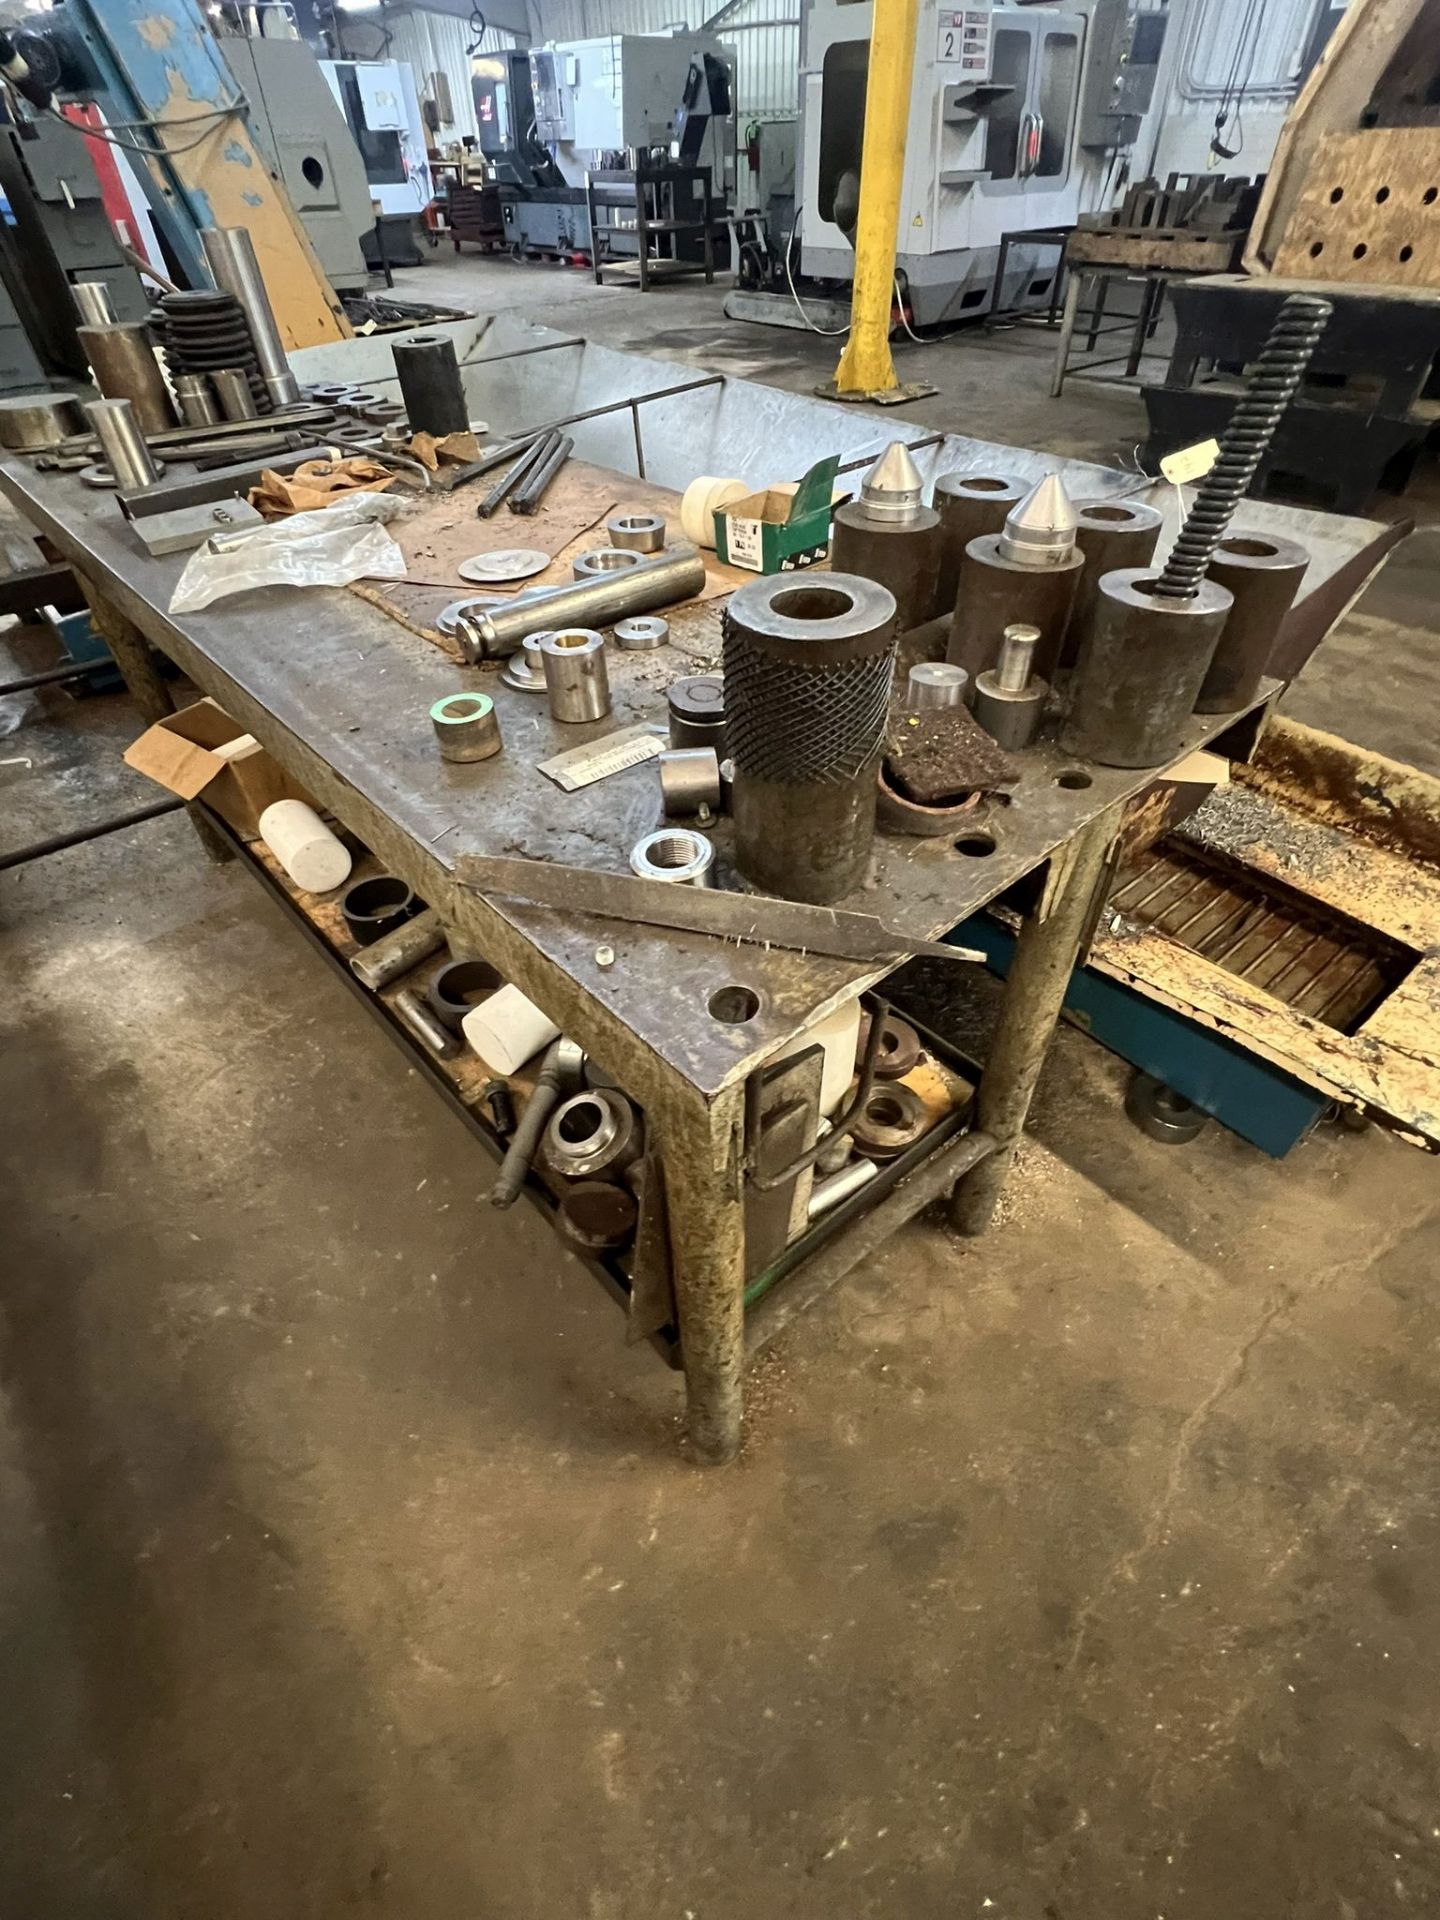 Metal Work Bench & Contents of Tooling